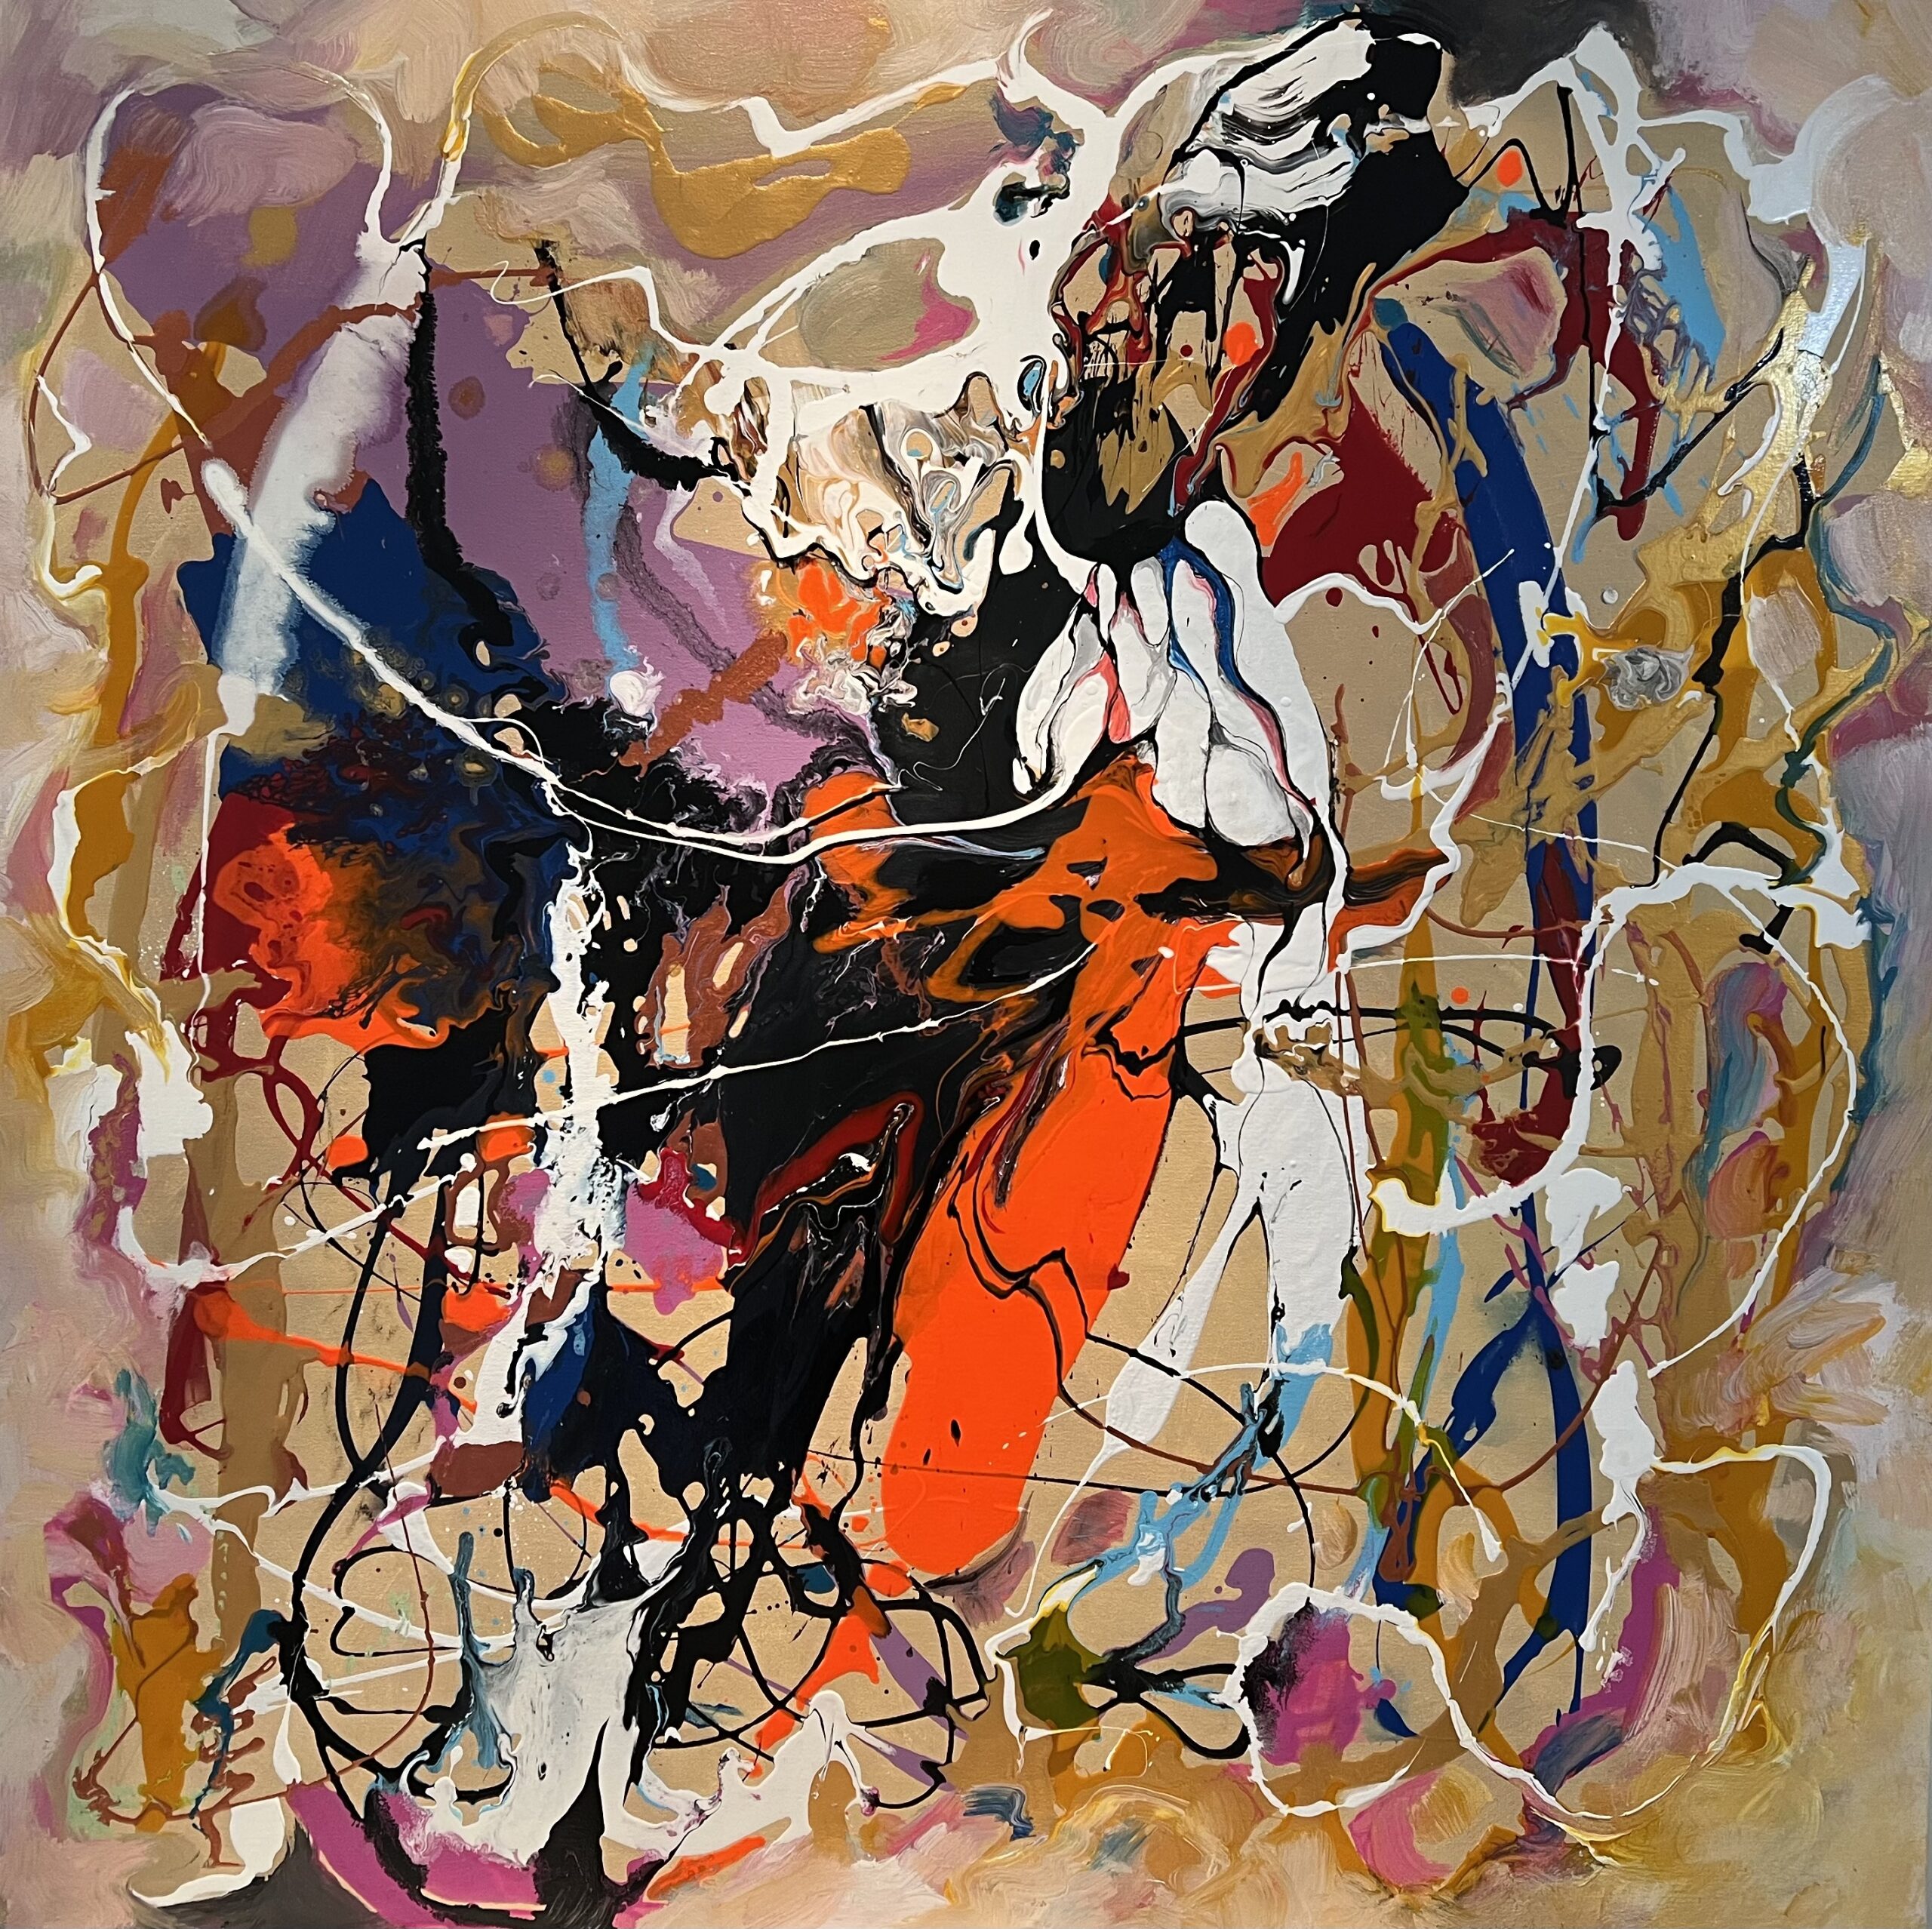 A vibrant abstract painting featuring large, fluid shapes in a lively and dynamic composition. The canvas bursts with an array of bold and colorful forms, capturing a sense of energetic movement and spontaneity. The vivid hues and flowing contours create a visually engaging experience that radiates a lively and expressive atmosphere.